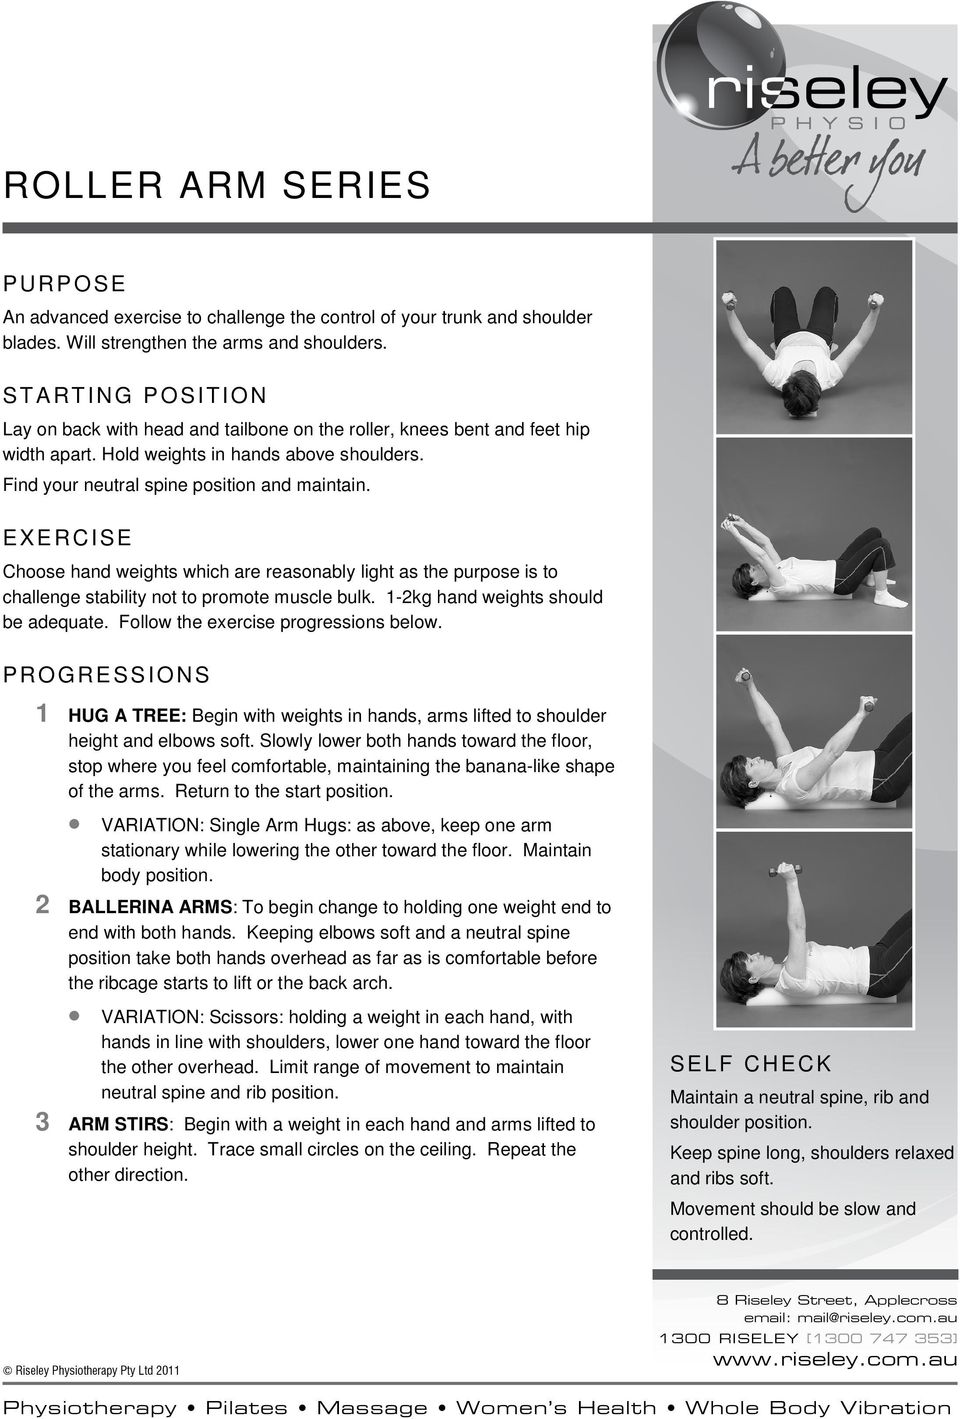 Choose hand weights which are reasonably light as the purpose is to challenge stability not to promote muscle bulk. 1-2kg hand weights should be adequate. Follow the exercise progressions below.